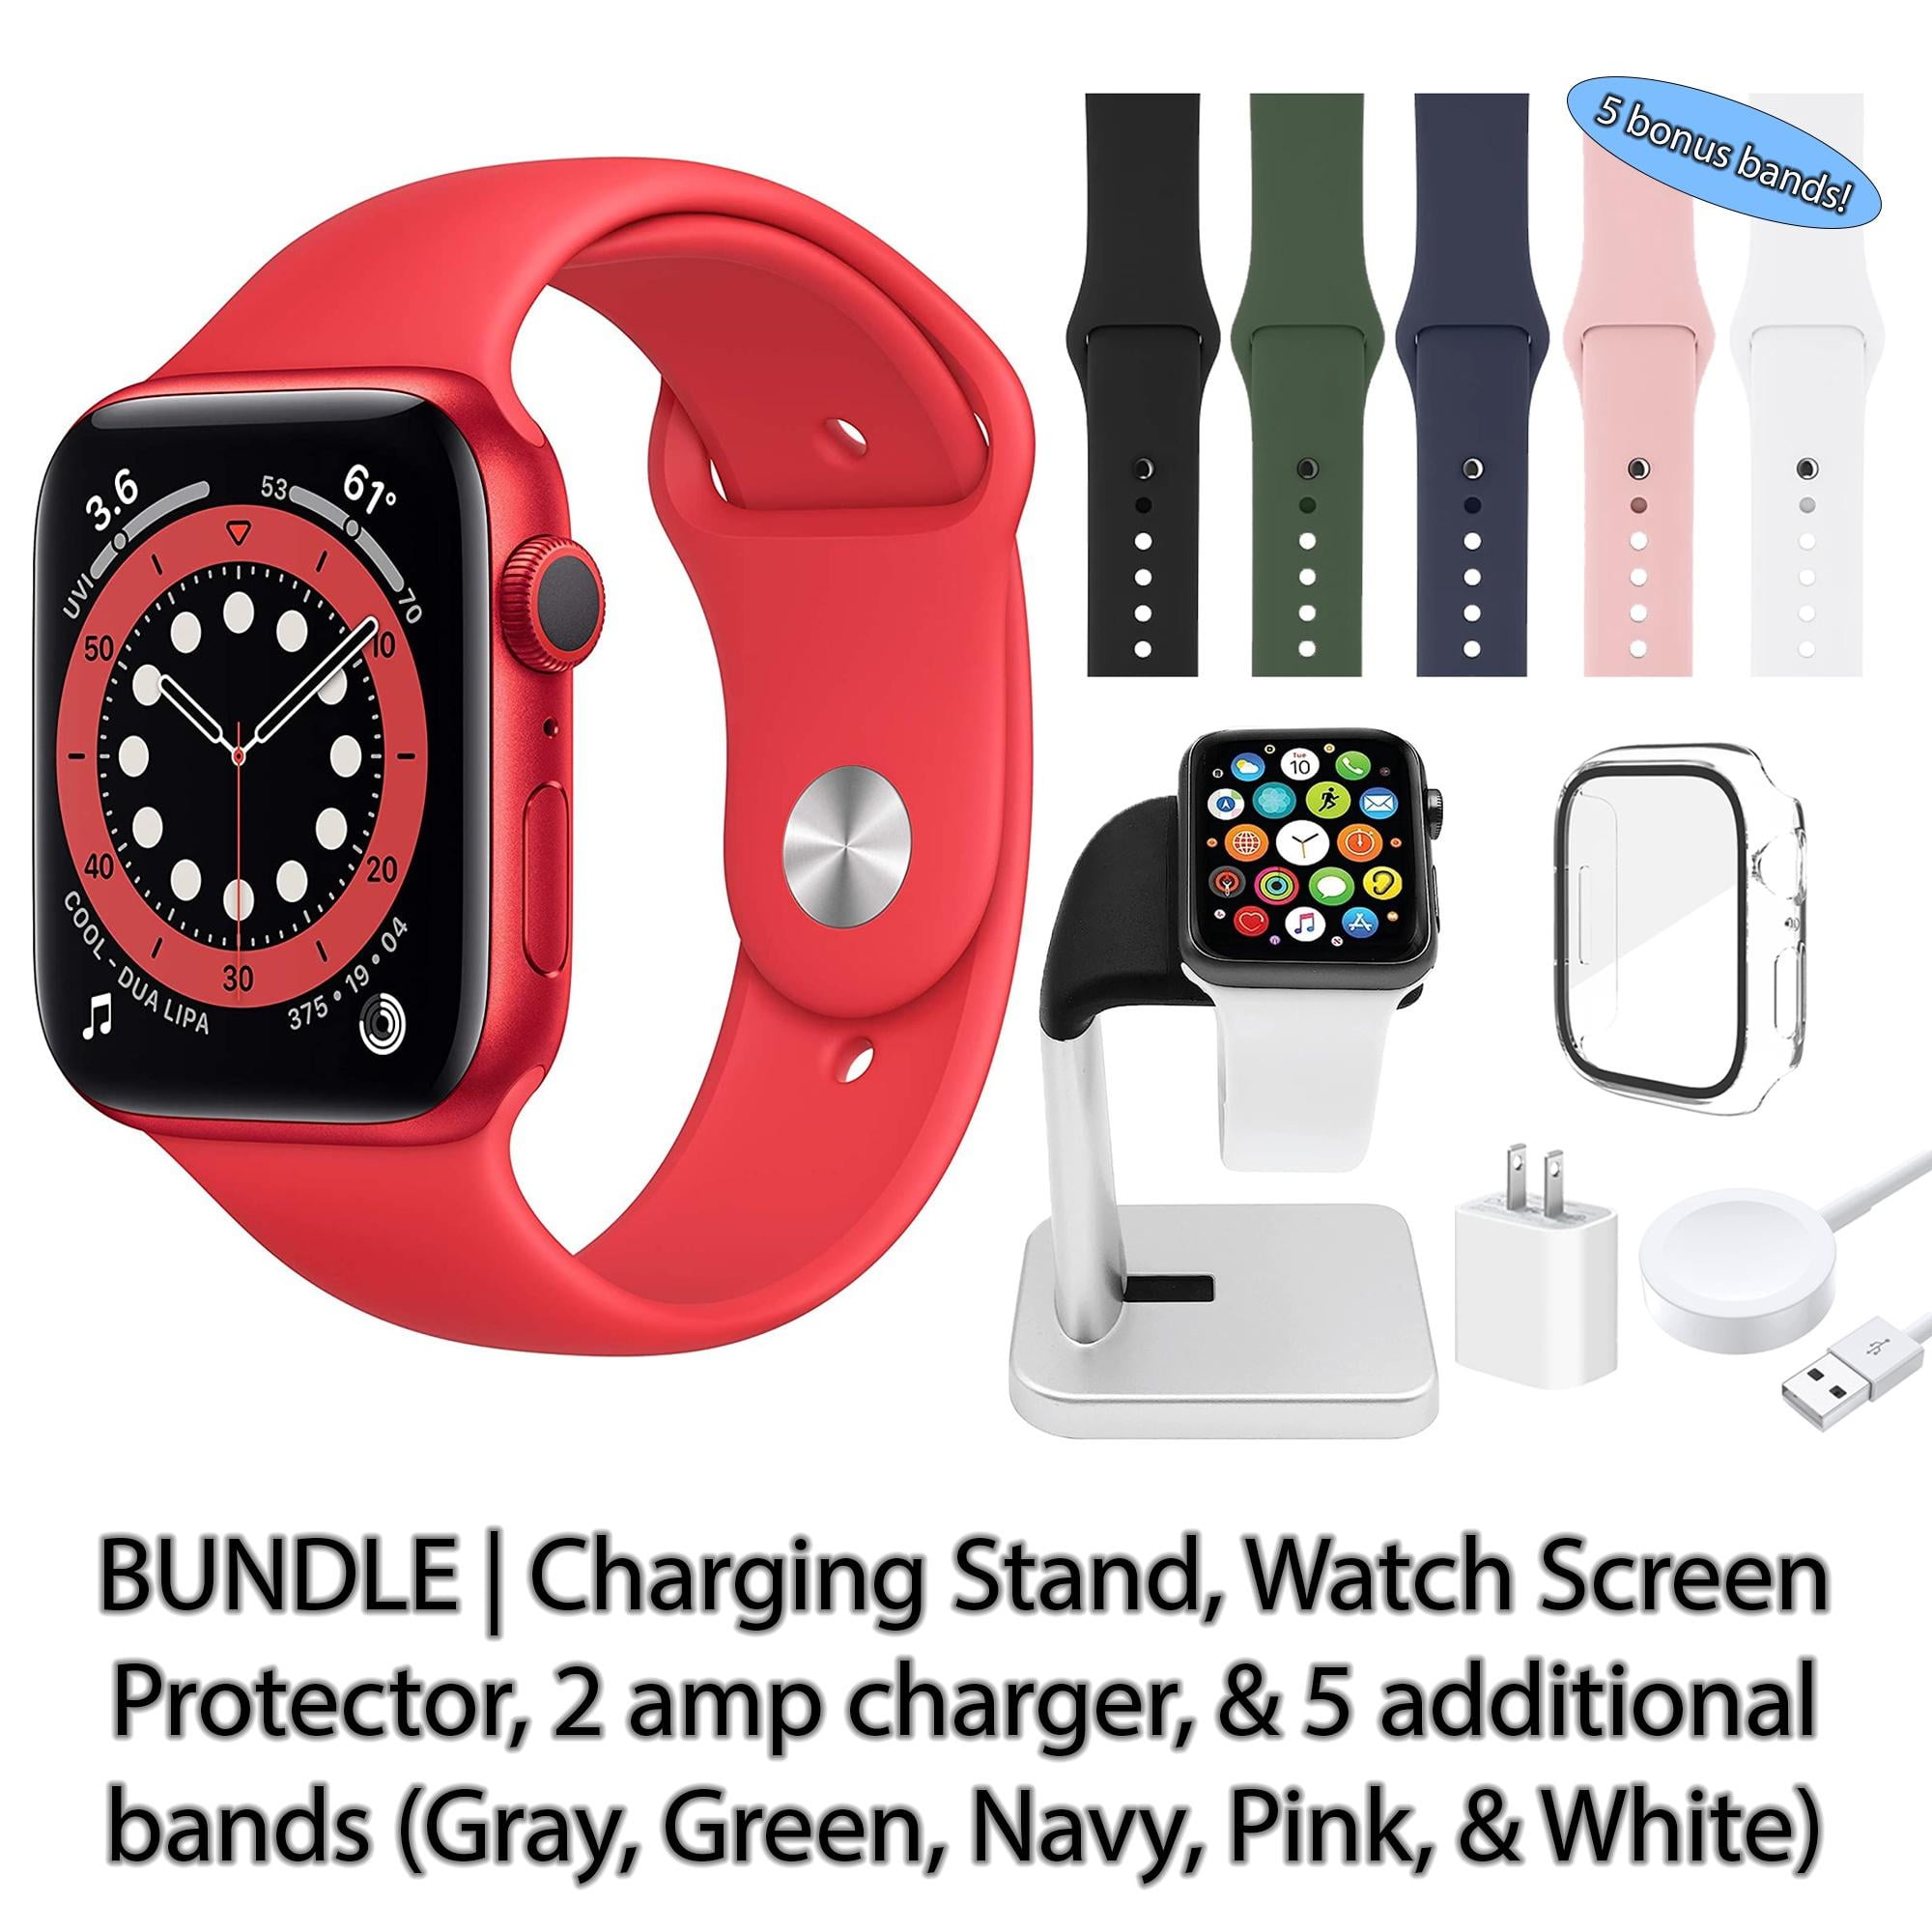 Restored Apple Watch Series 6 (GPS, 40 mm) Red Aluminum Case with Red Sport Band | 5 Bonus Bands, Charging Stand, Screen Protector, & 2 amp charger (Refurbished)